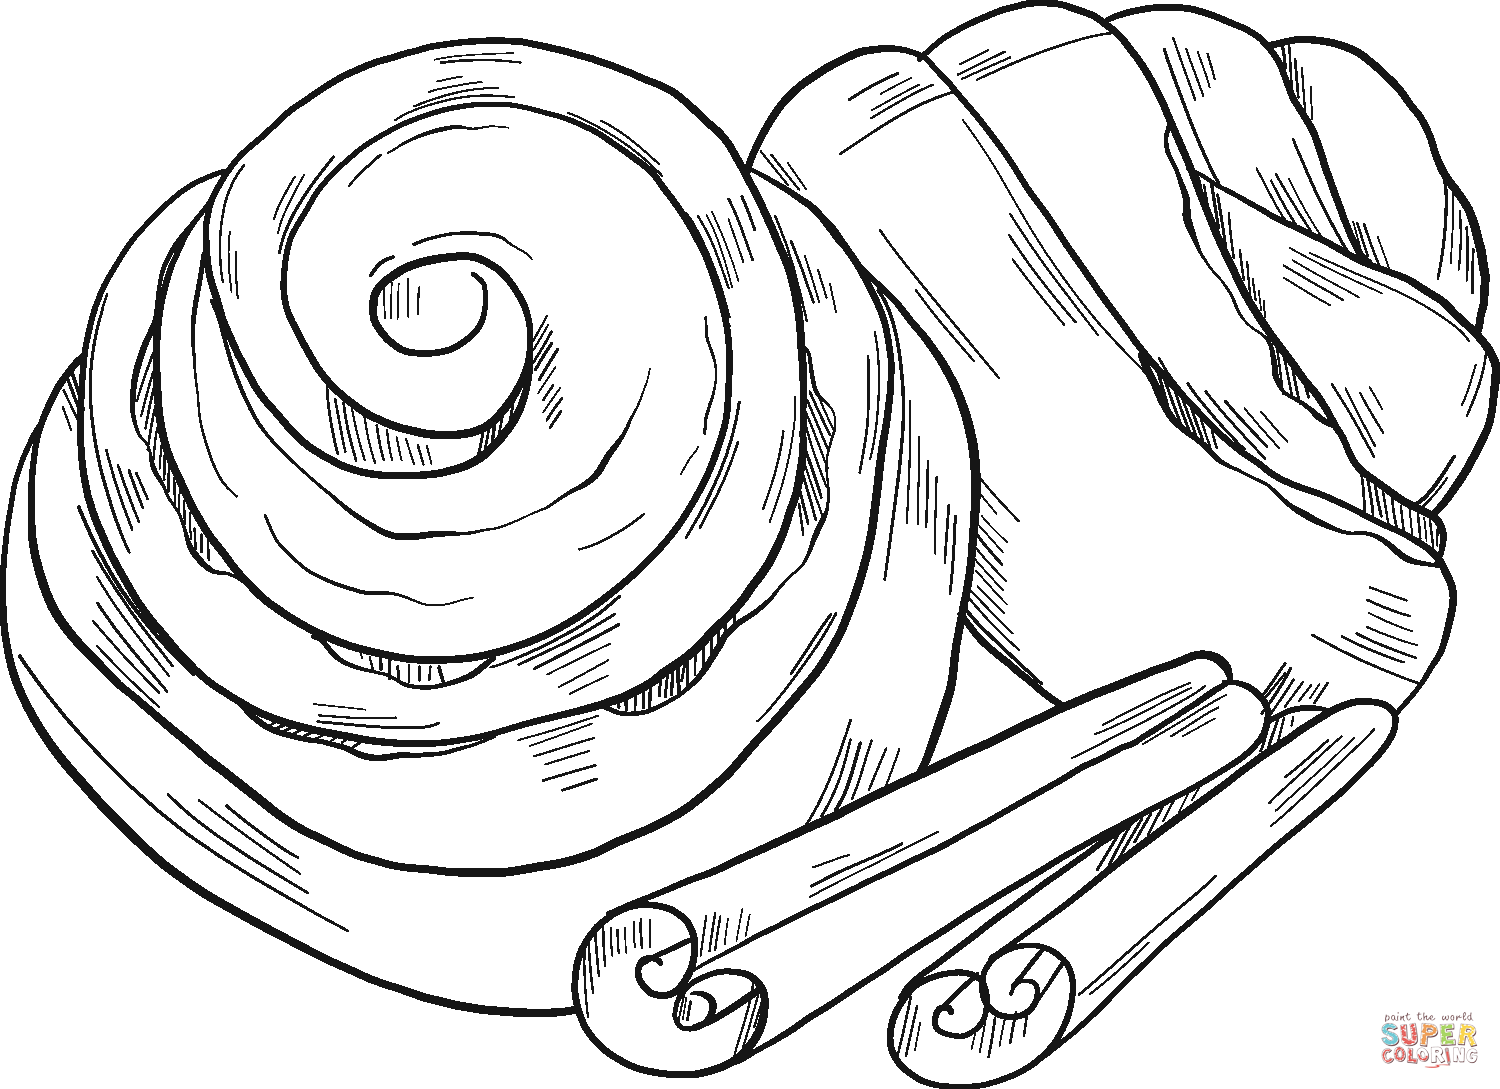 cinnamon-rolls-coloring-page-free-printable-coloring-page-coloring-home